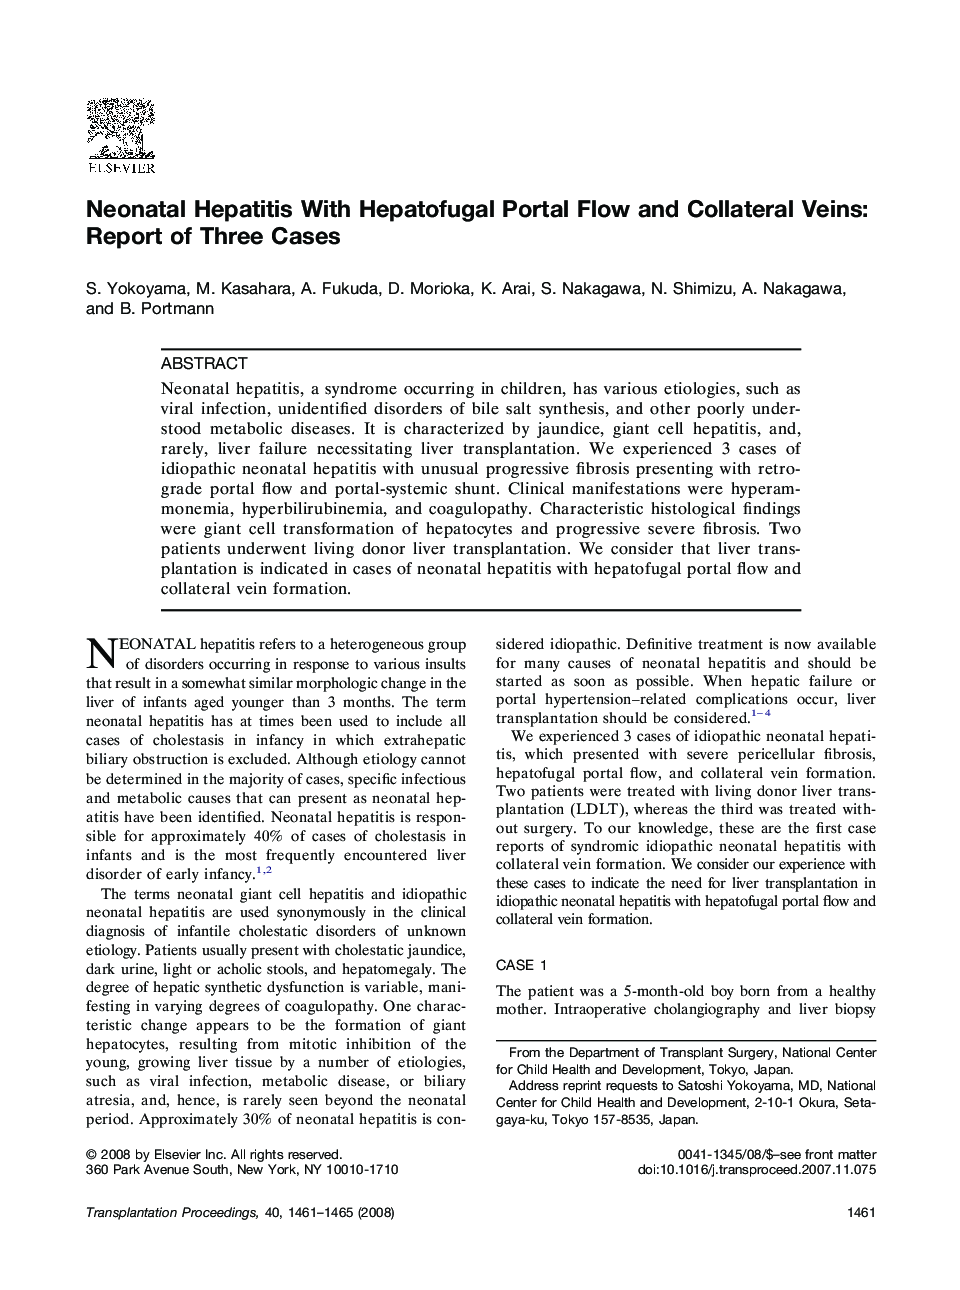 Neonatal Hepatitis With Hepatofugal Portal Flow and Collateral Veins: Report of Three Cases